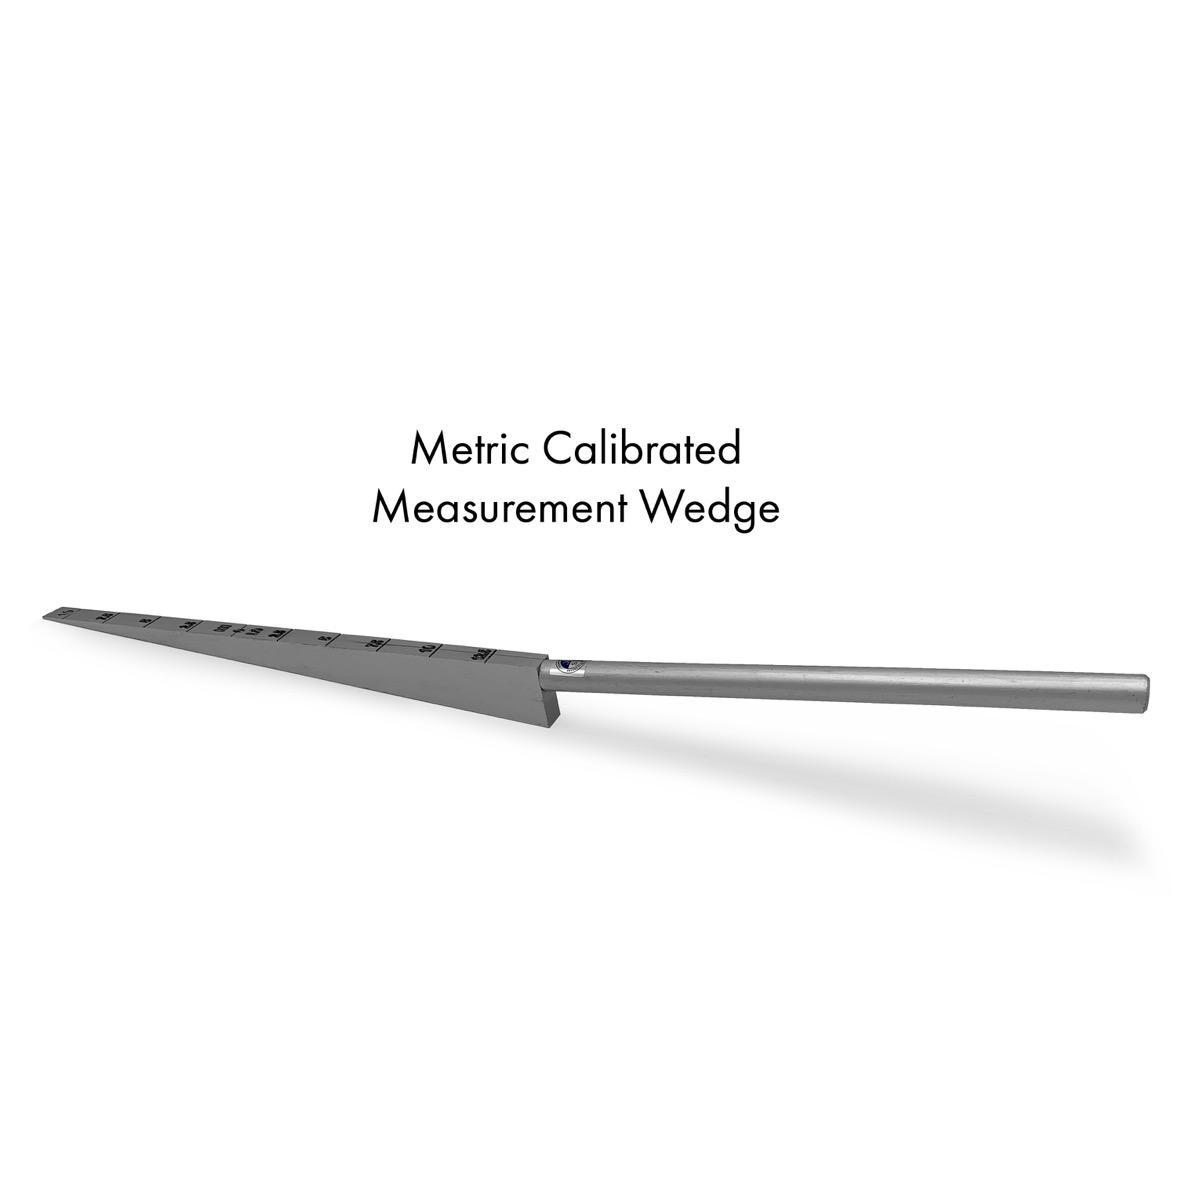 A Metric Graduated Measurement Wedge is a great tool for the task of determining how accurate the work is by sliding the wedge under a straight edge tool which has raised blocks to take the measurement.